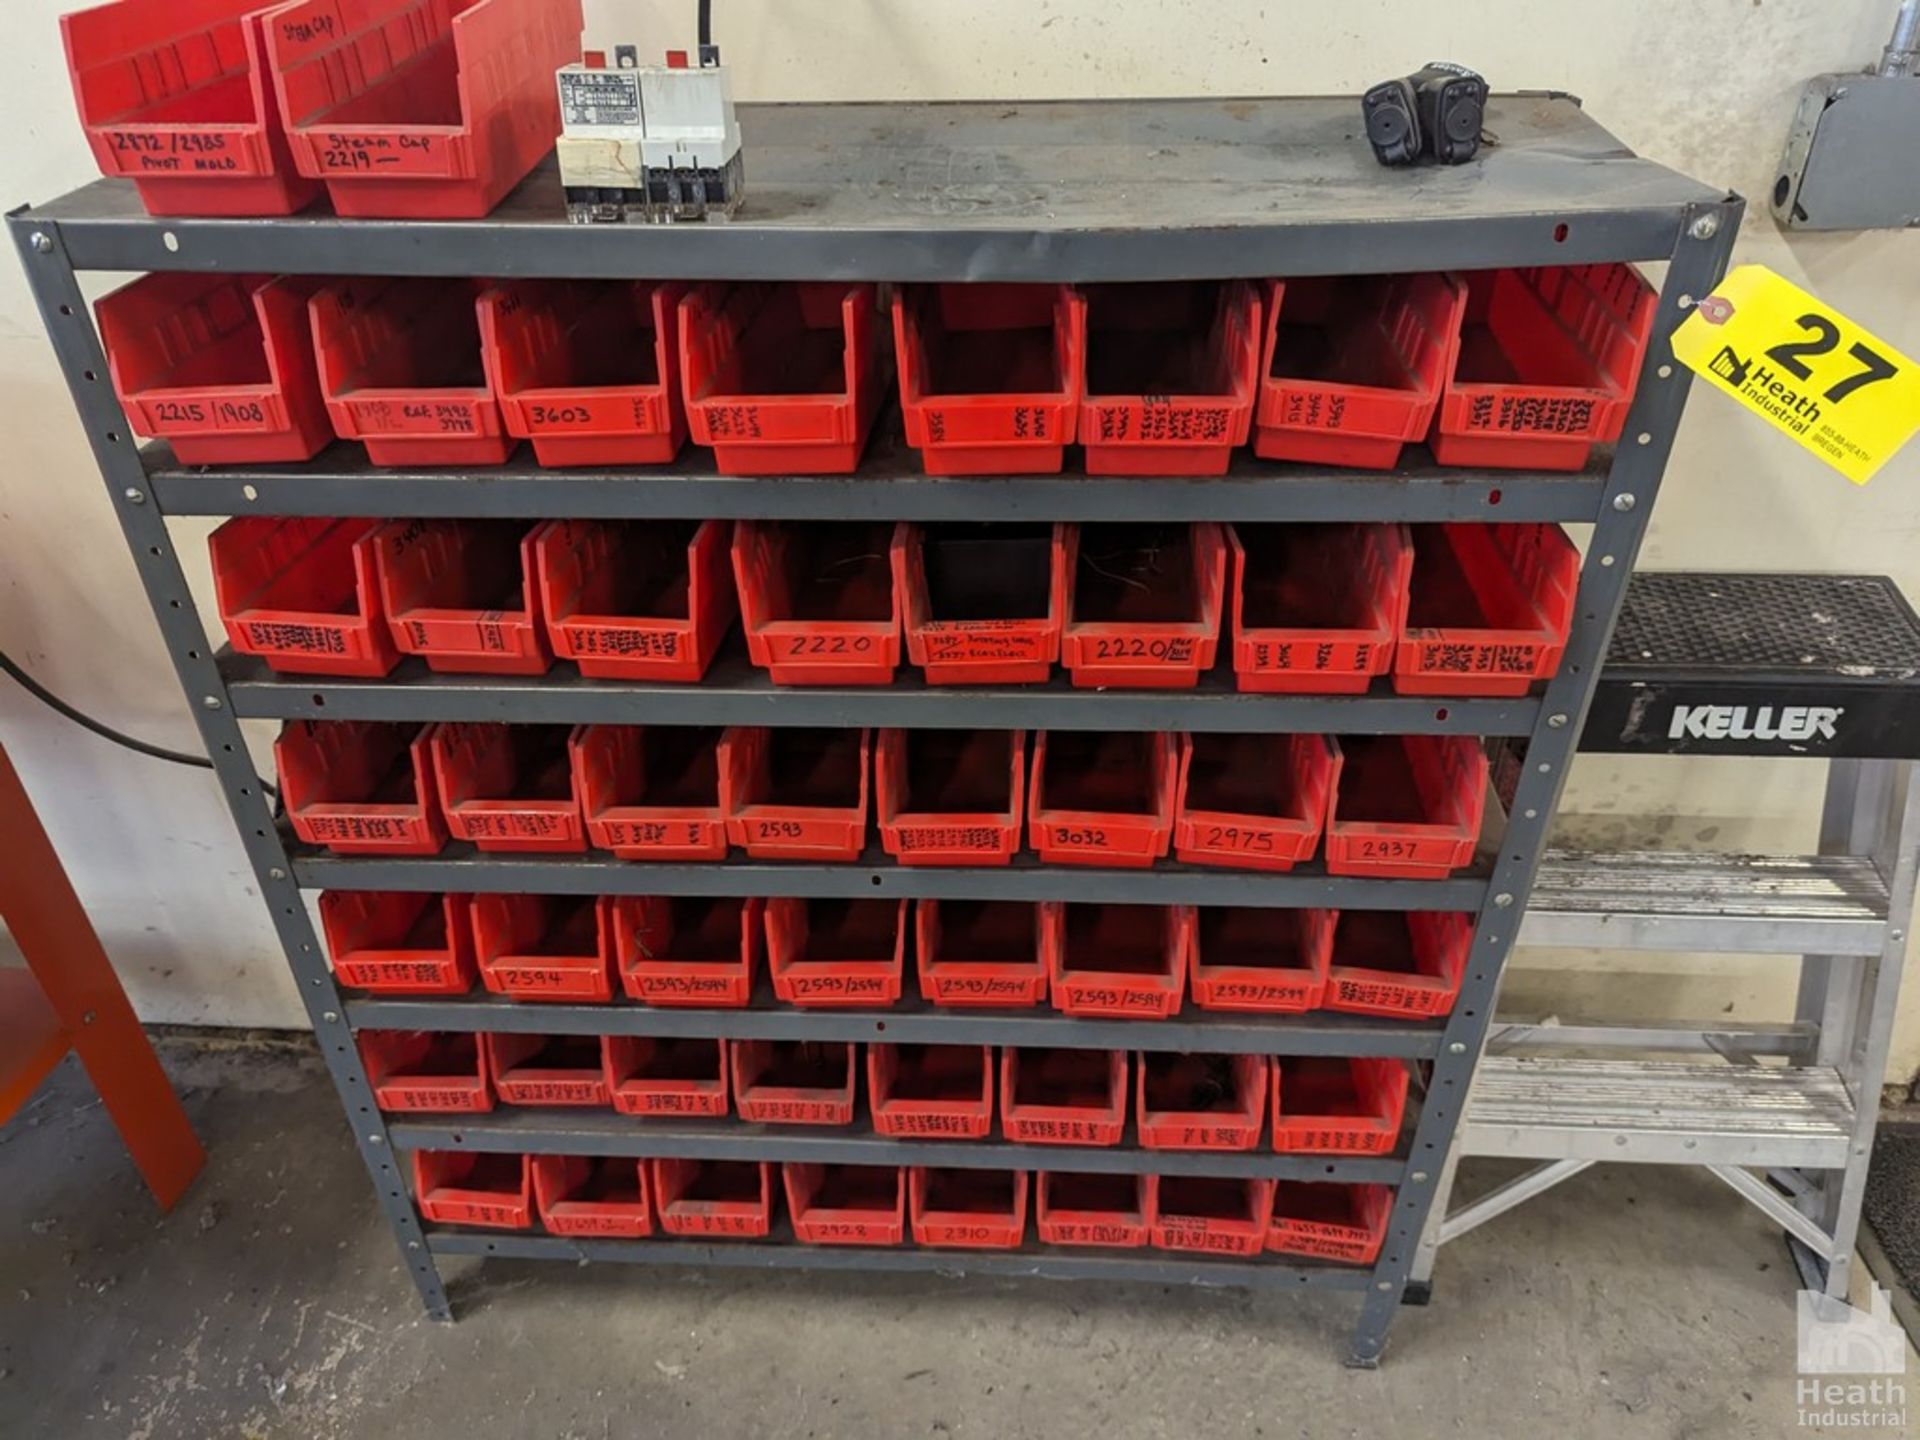 ADJUSTABLE SHELVING UNIT WITH PART BINS 36" X 12" X 42"